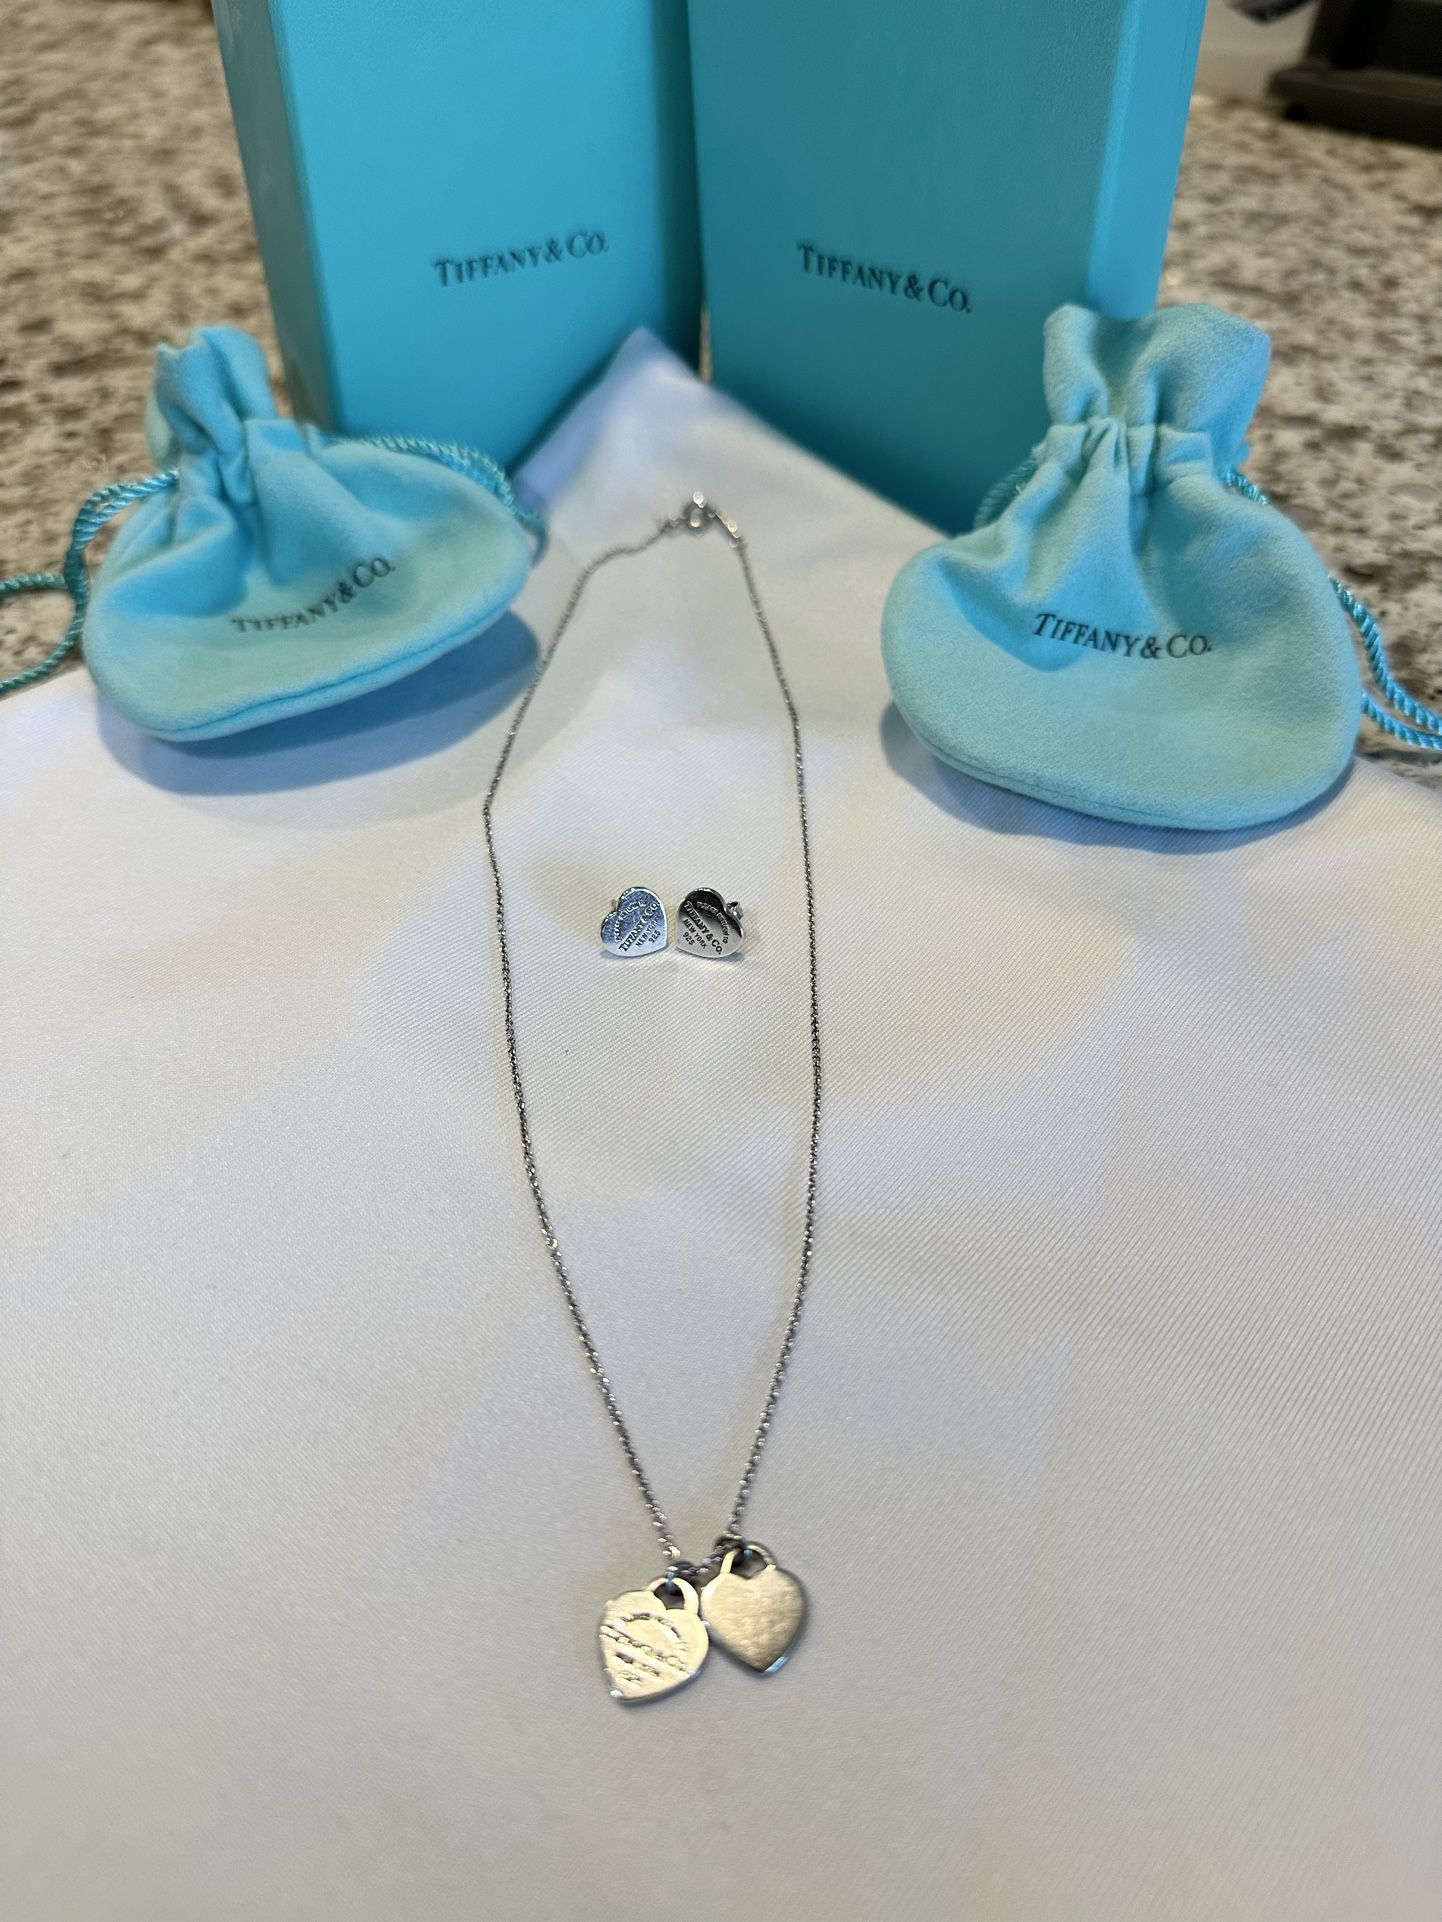 Return To Tiffany Heart Necklace And Earrings Set